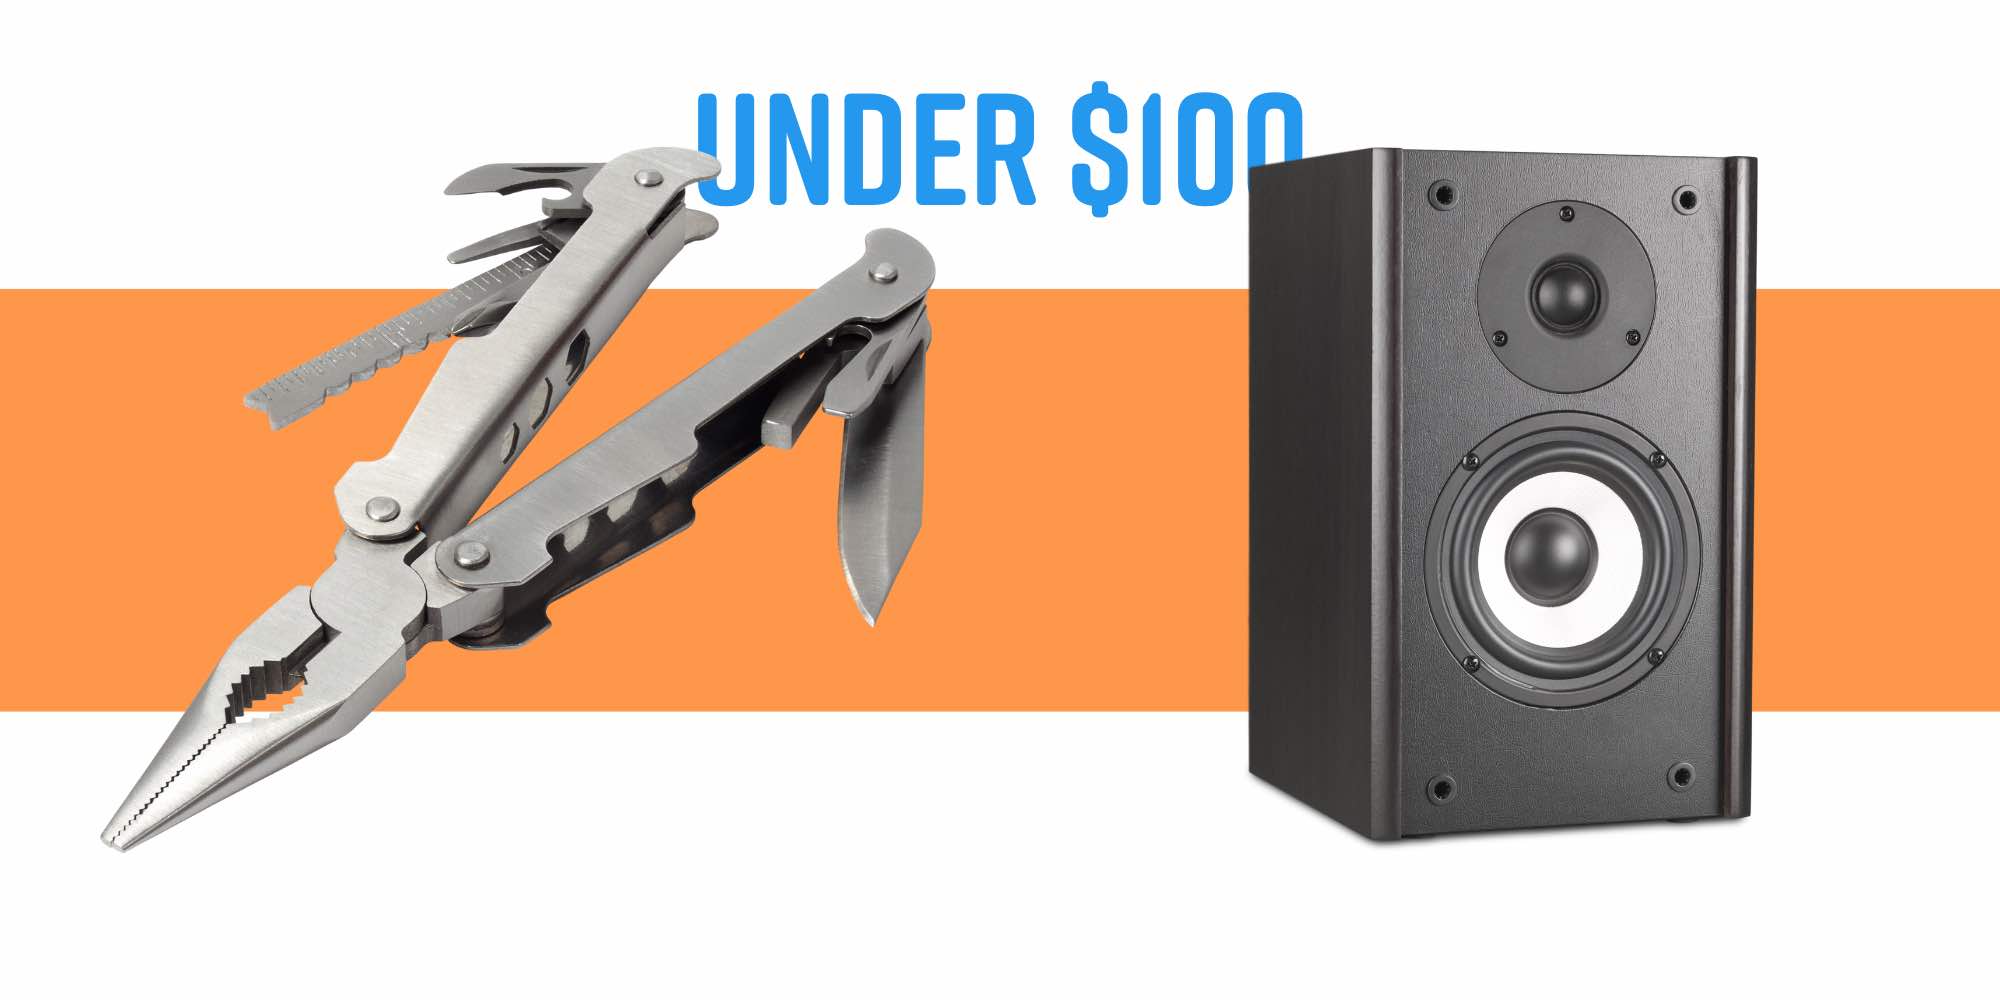 A multitool or a Bluetooth speaker would be a great gift to give your worship leader